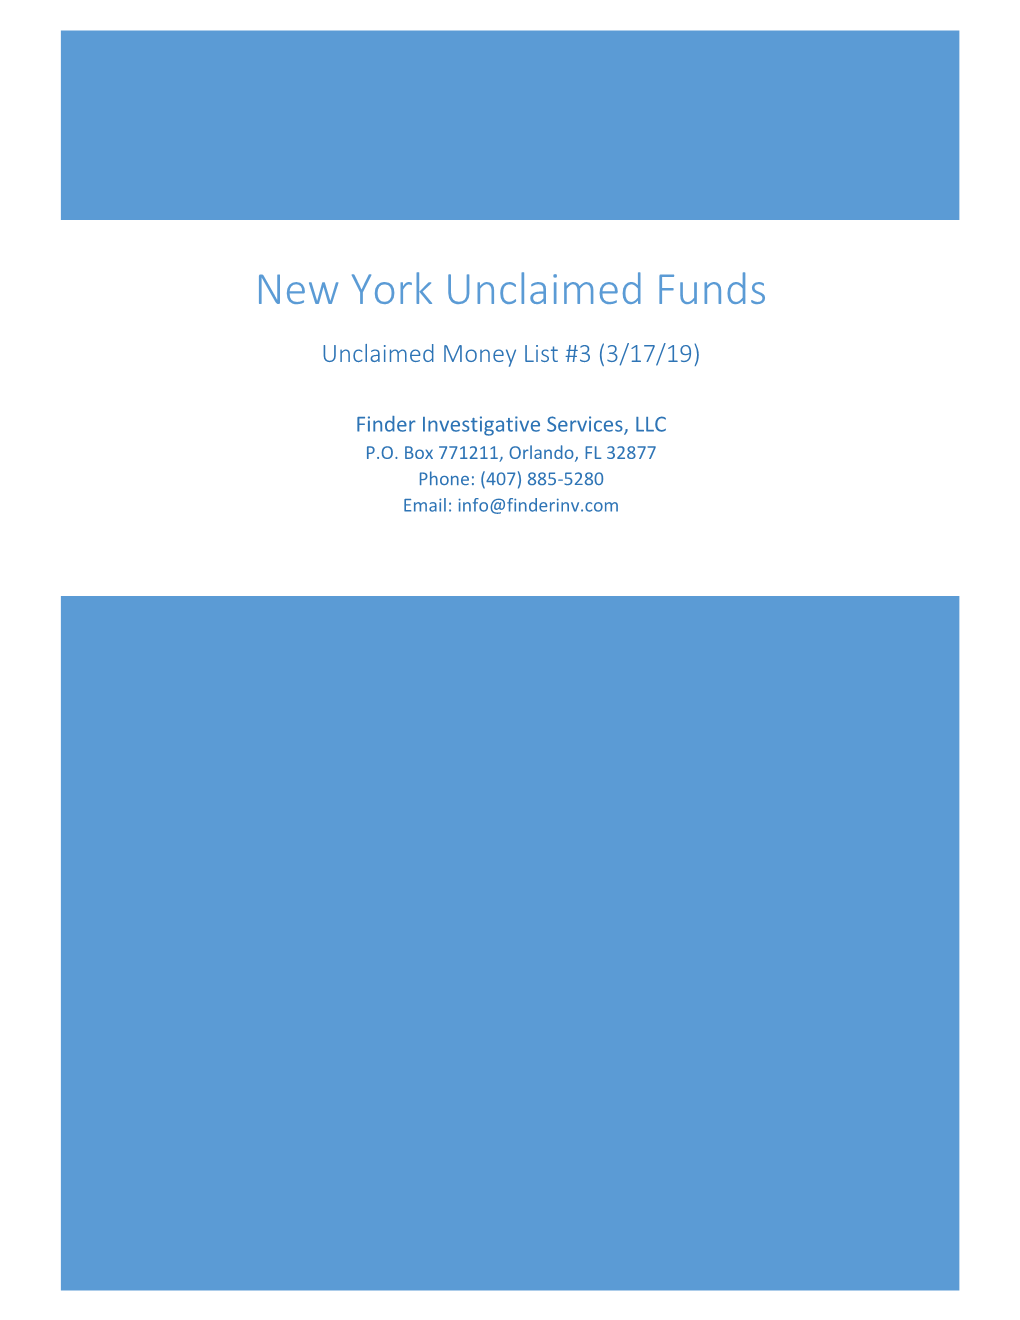 New York Unclaimed Funds Unclaimed Money List #3 (3/17/19)